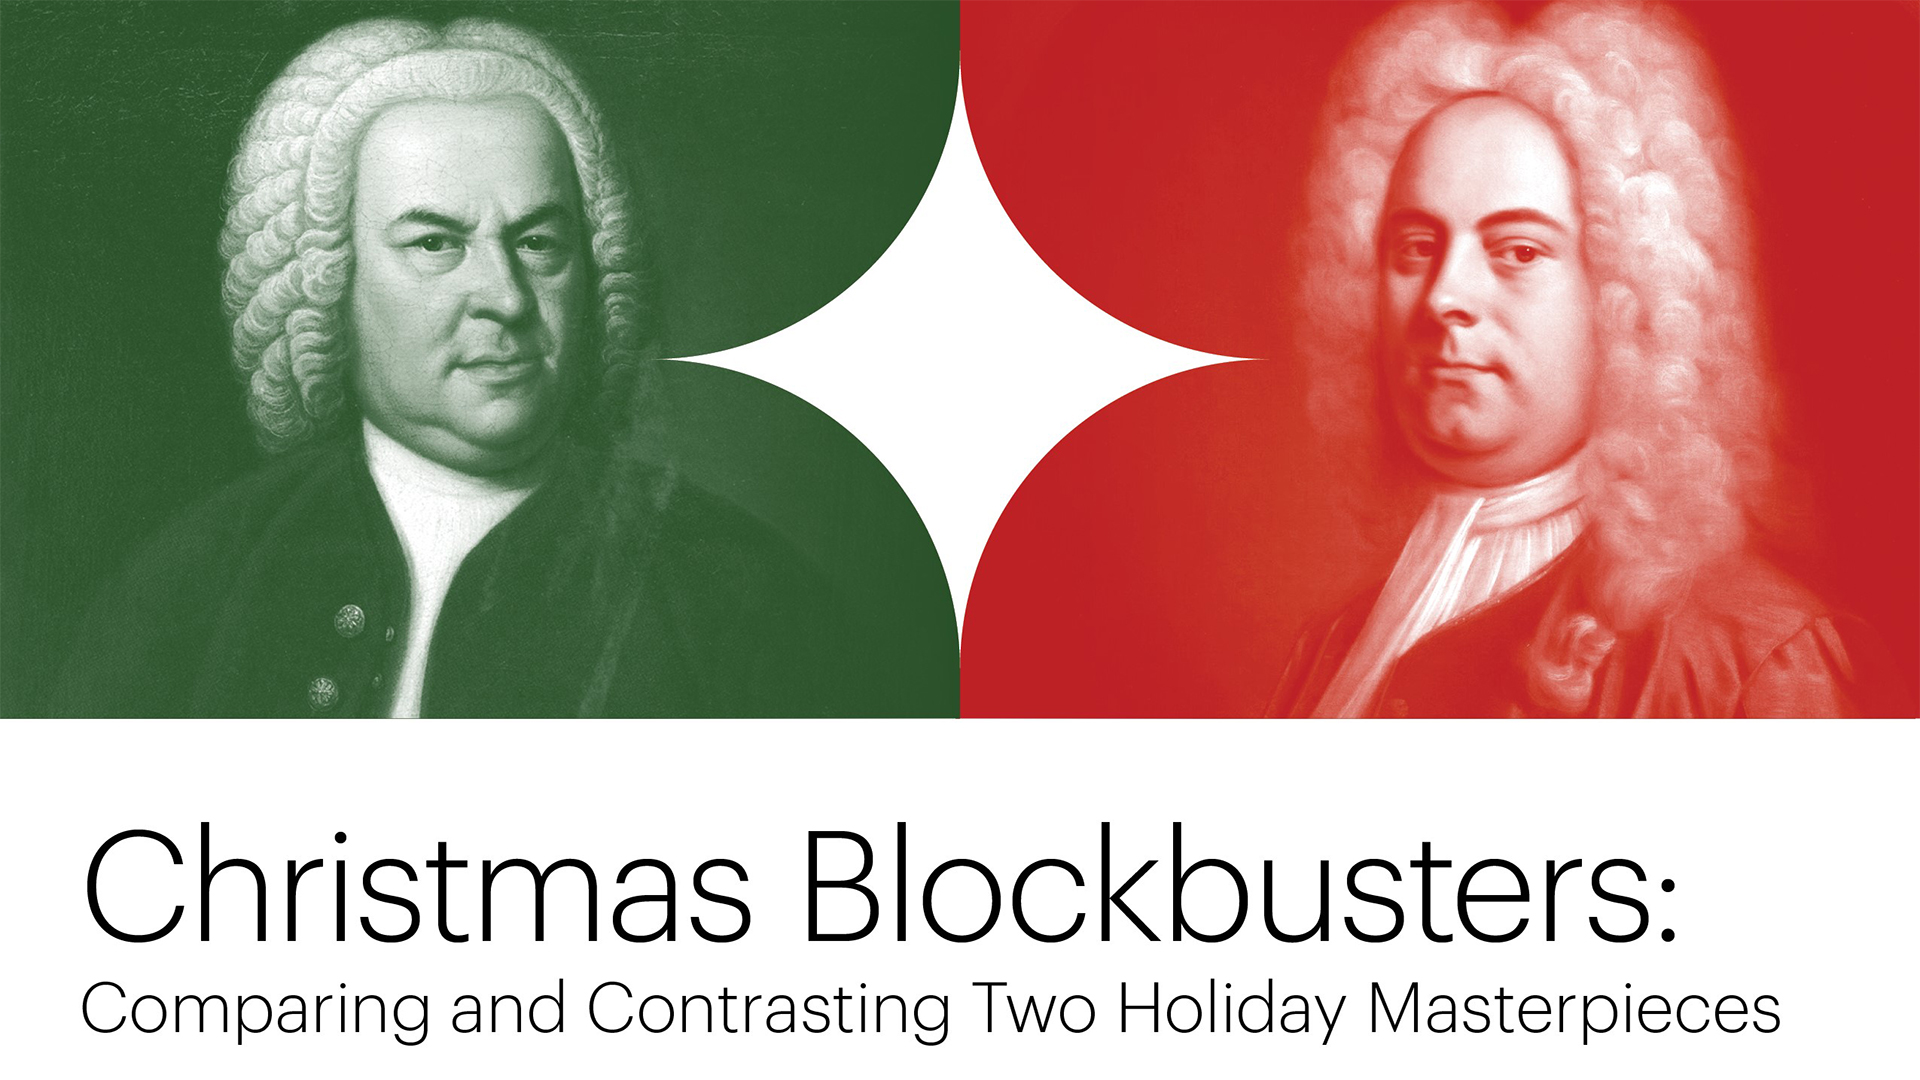 Christmas Blockbusters: portraits of Bach and Handel overlaid with green and red